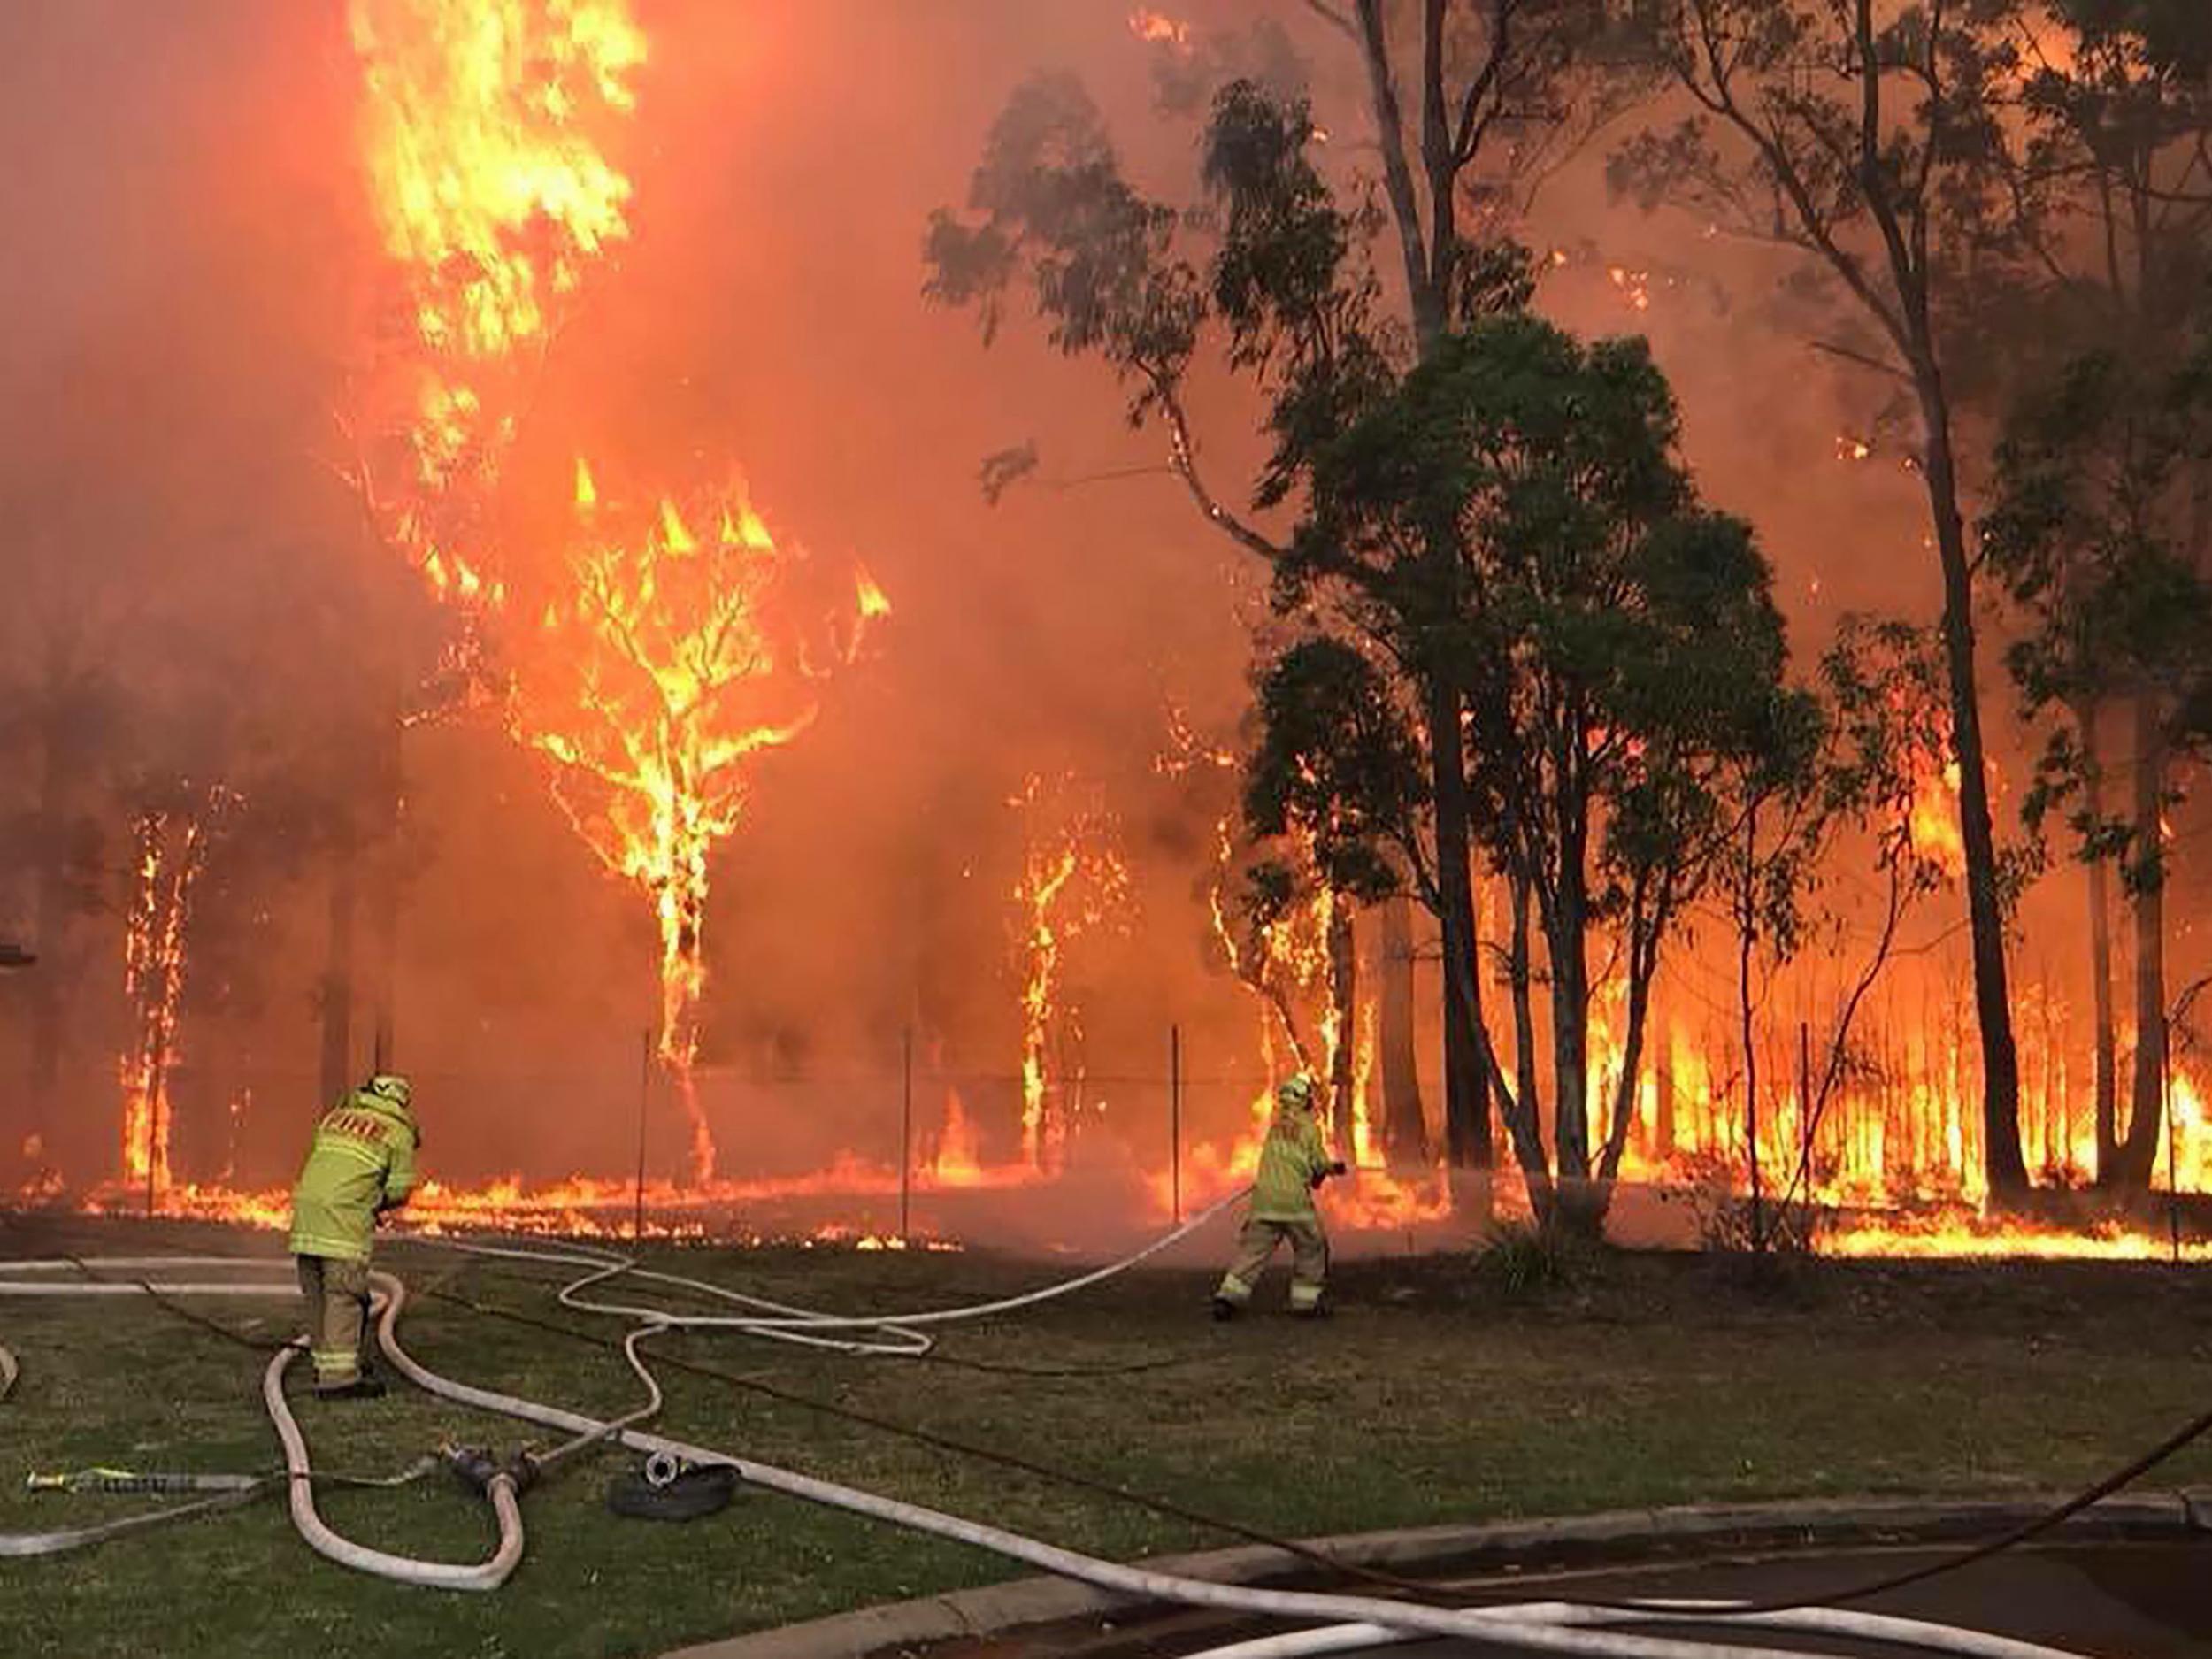 Firefighters tackle a bush fire in Holdsworthy, south of Sydney on 15 April 2018